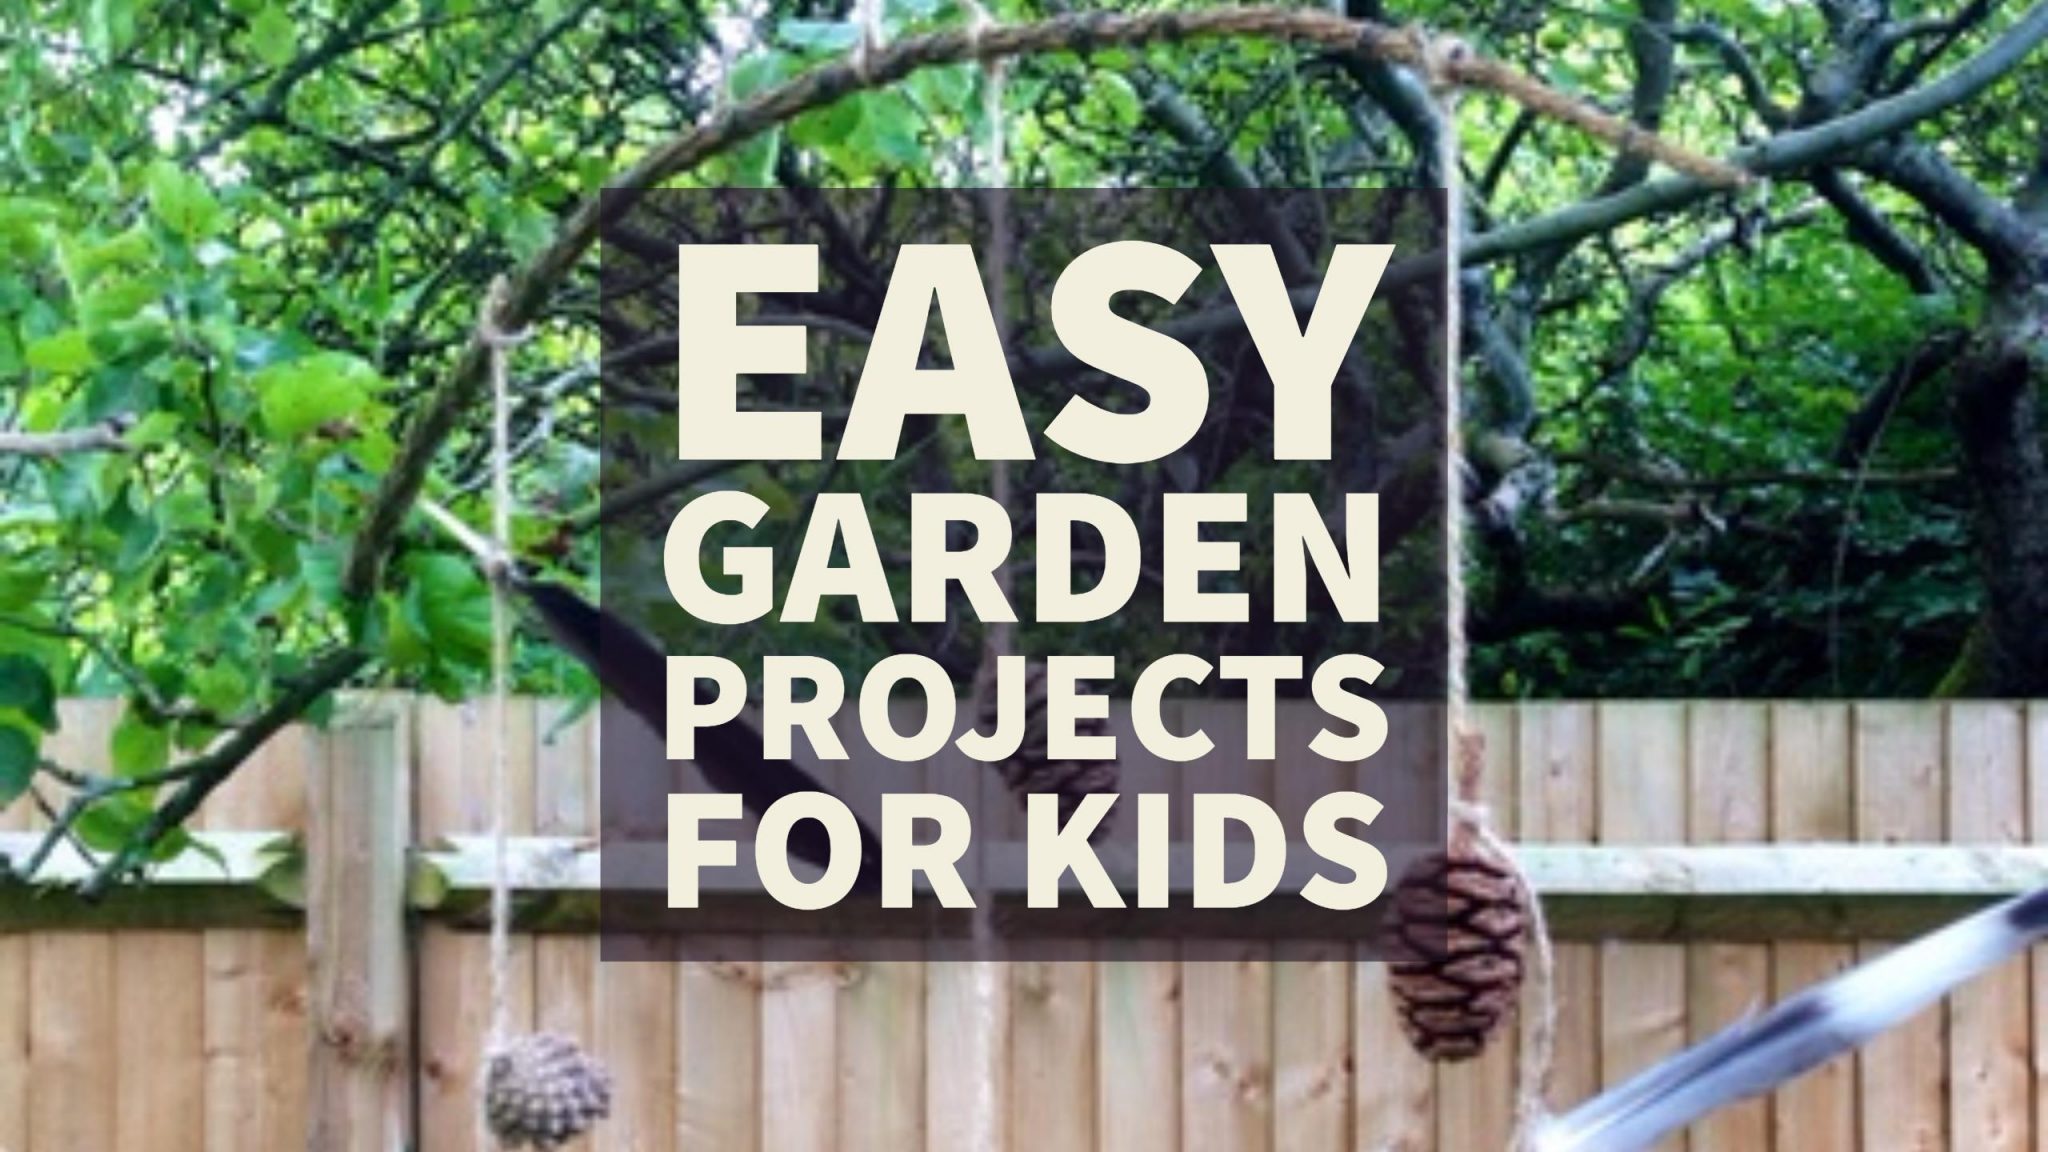 Easy Garden Projects For Kids - Red Kite Days